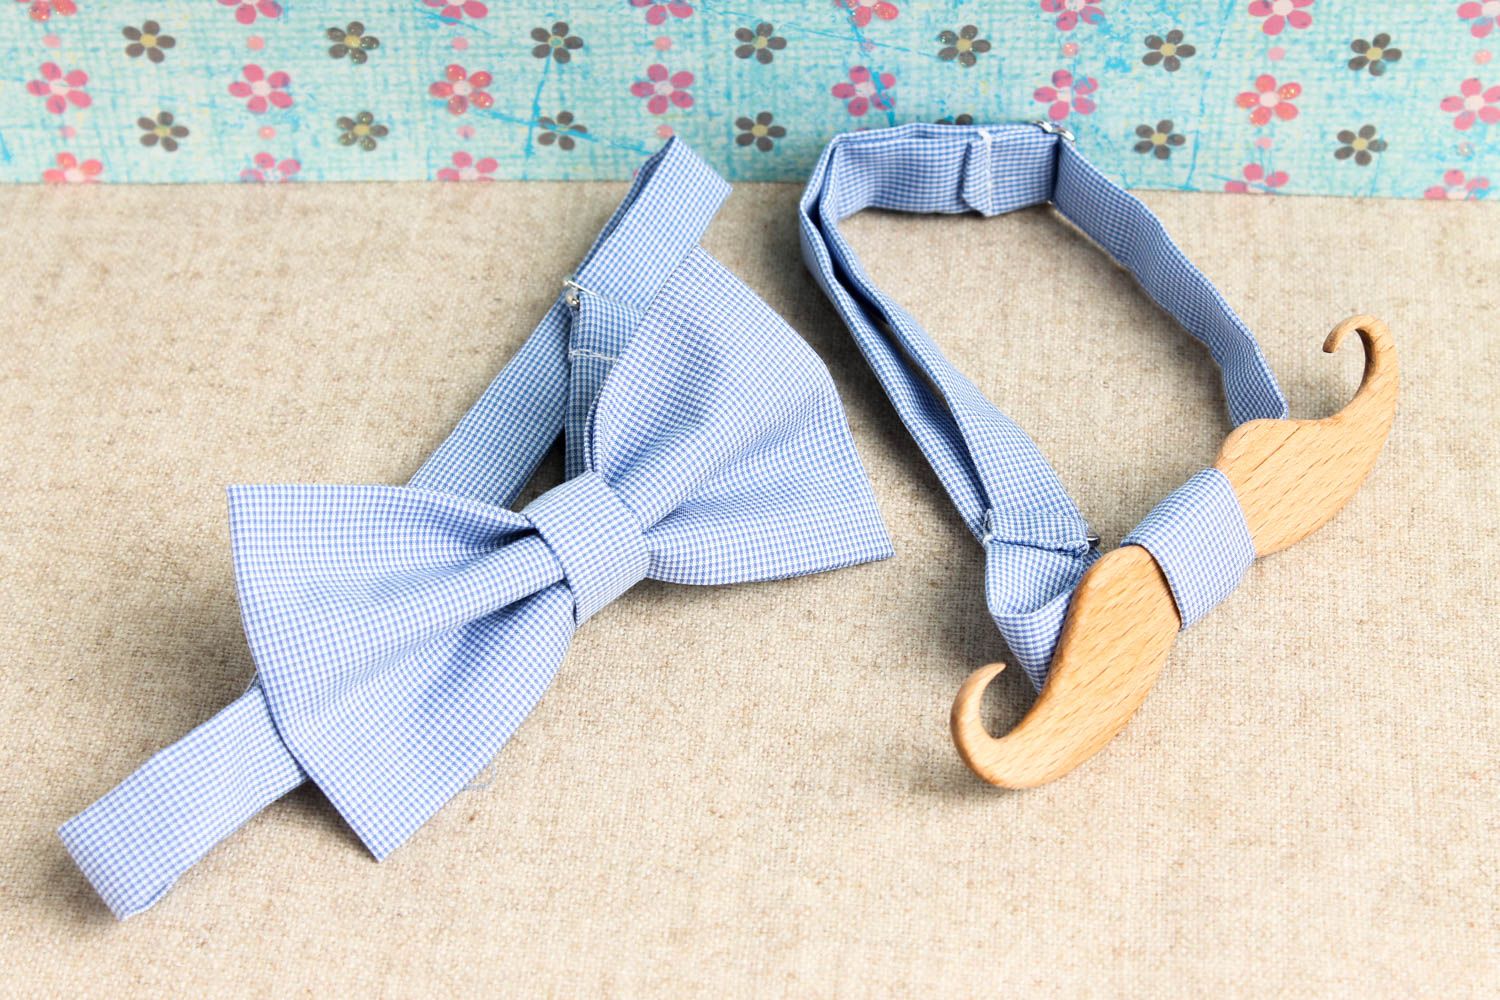 Handmade designer bow ties 2 stylish bow ties textile and wooden bow ties photo 1